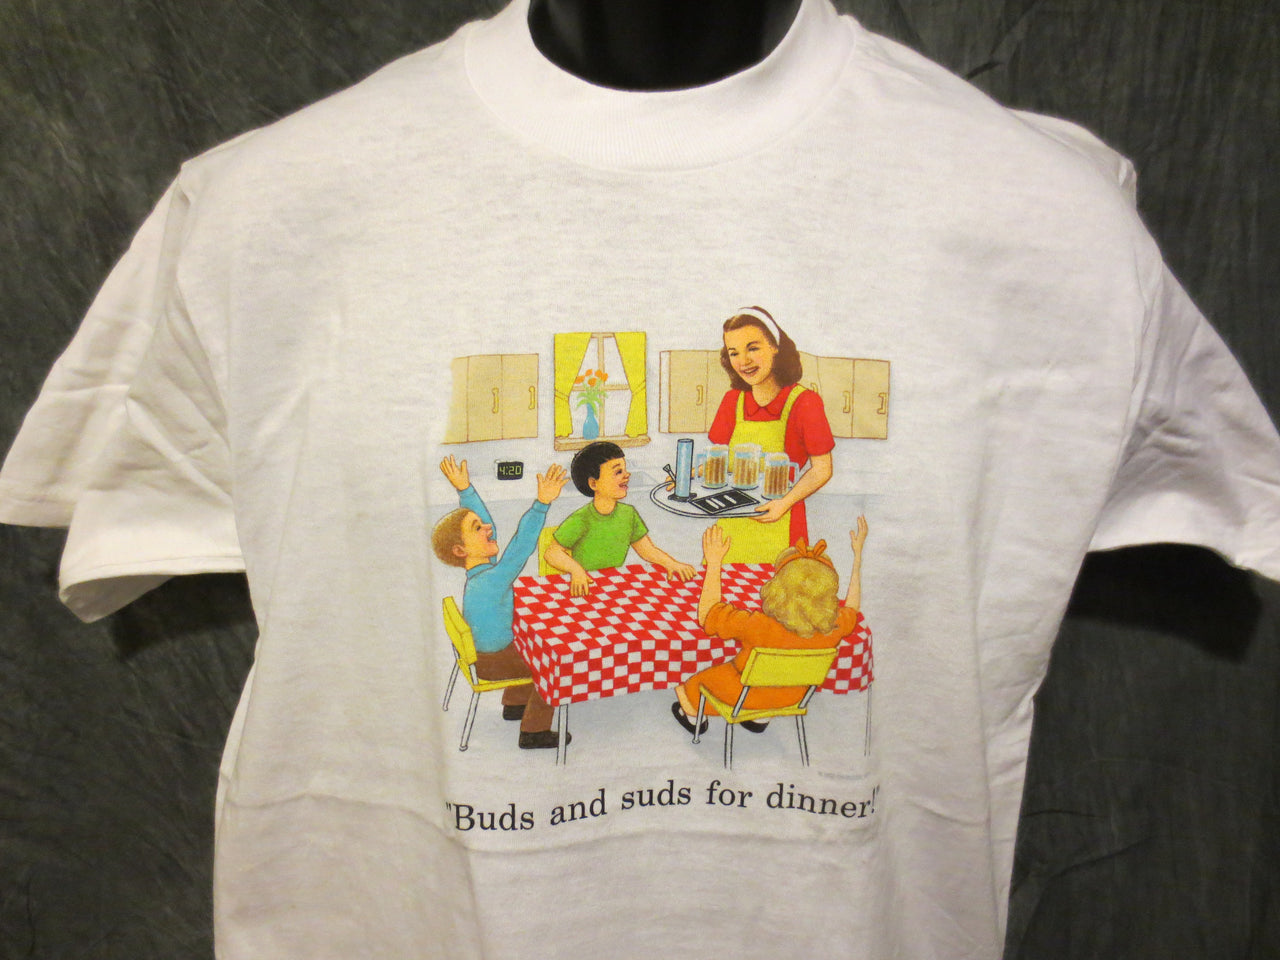 Childhood Buds and Suds for Dinner Adult White Tshirt - TshirtNow.net - 6